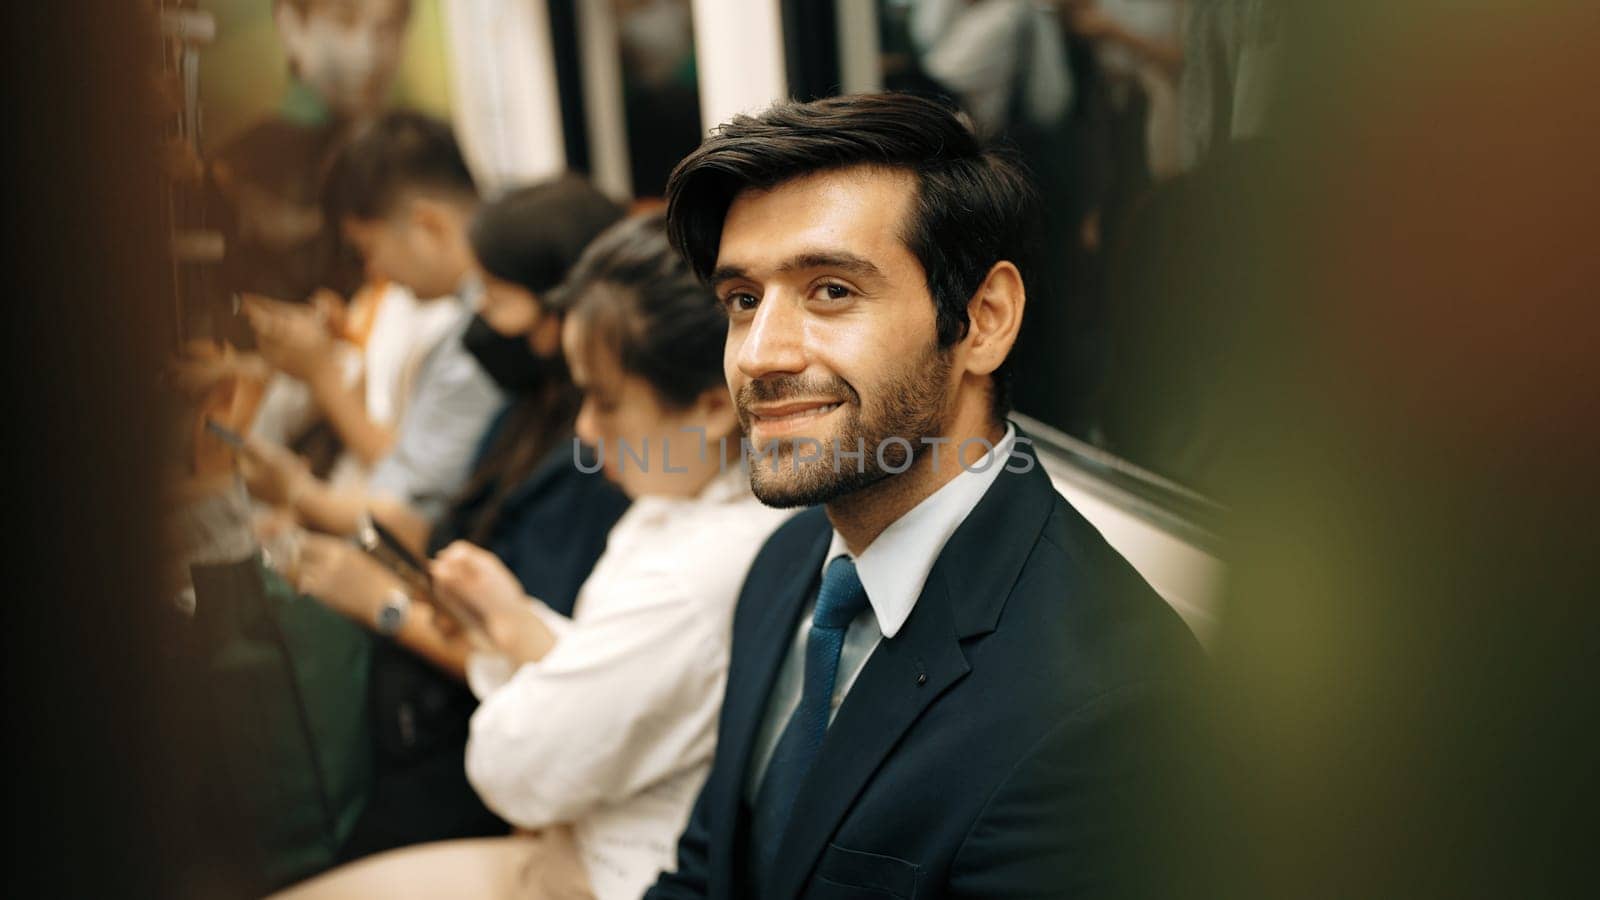 Smiling caucasian business man looking at mobile phone or playing social media while sitting in train. Attractive project manager going to work place by using public transport in rush hour. Exultant.